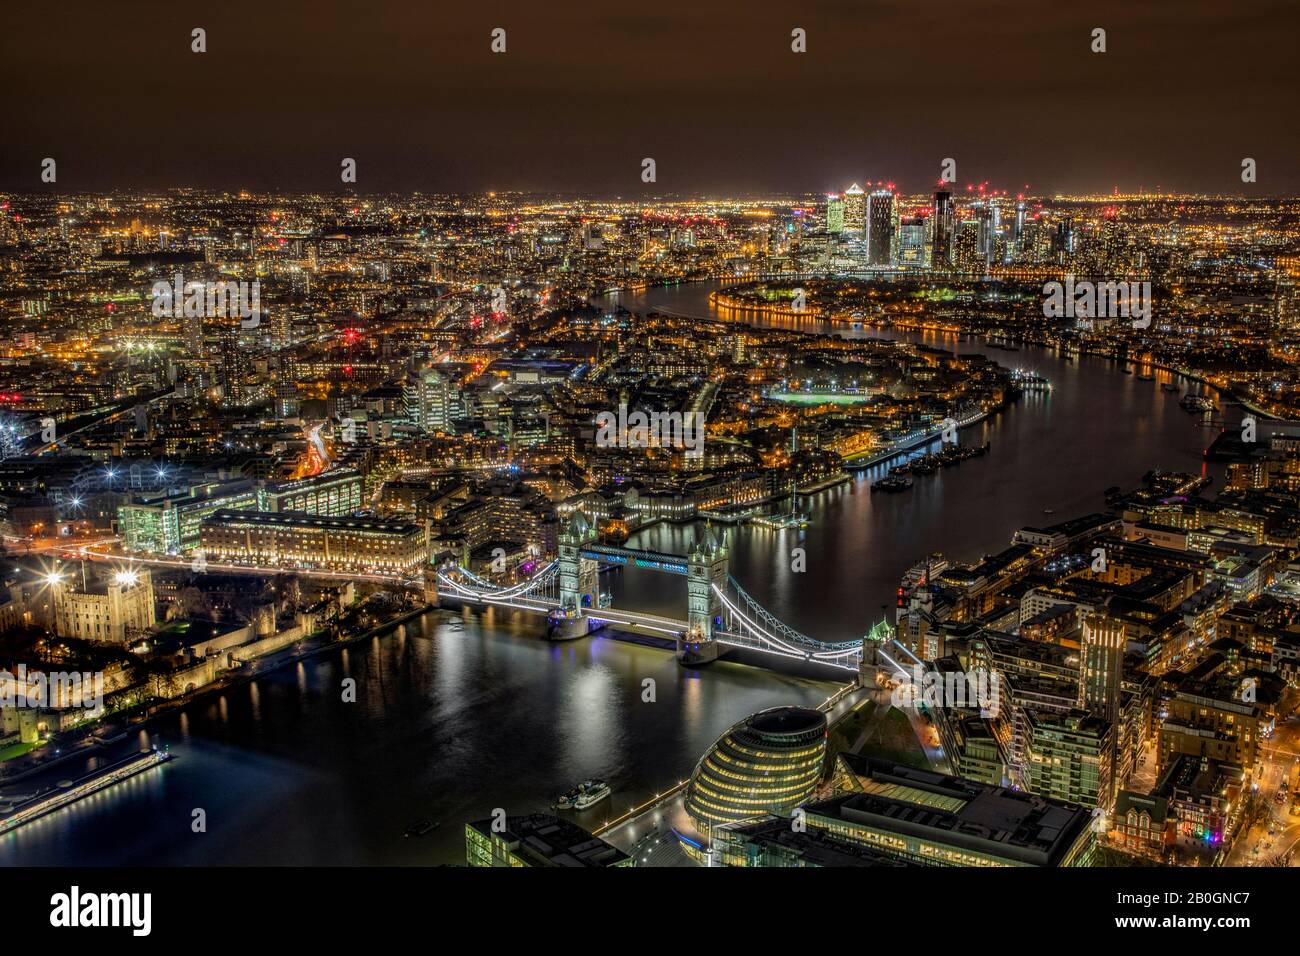 Aerial view of Tower Bridge and London after dark showing canary wharf and the city along the Thames Stock Photo